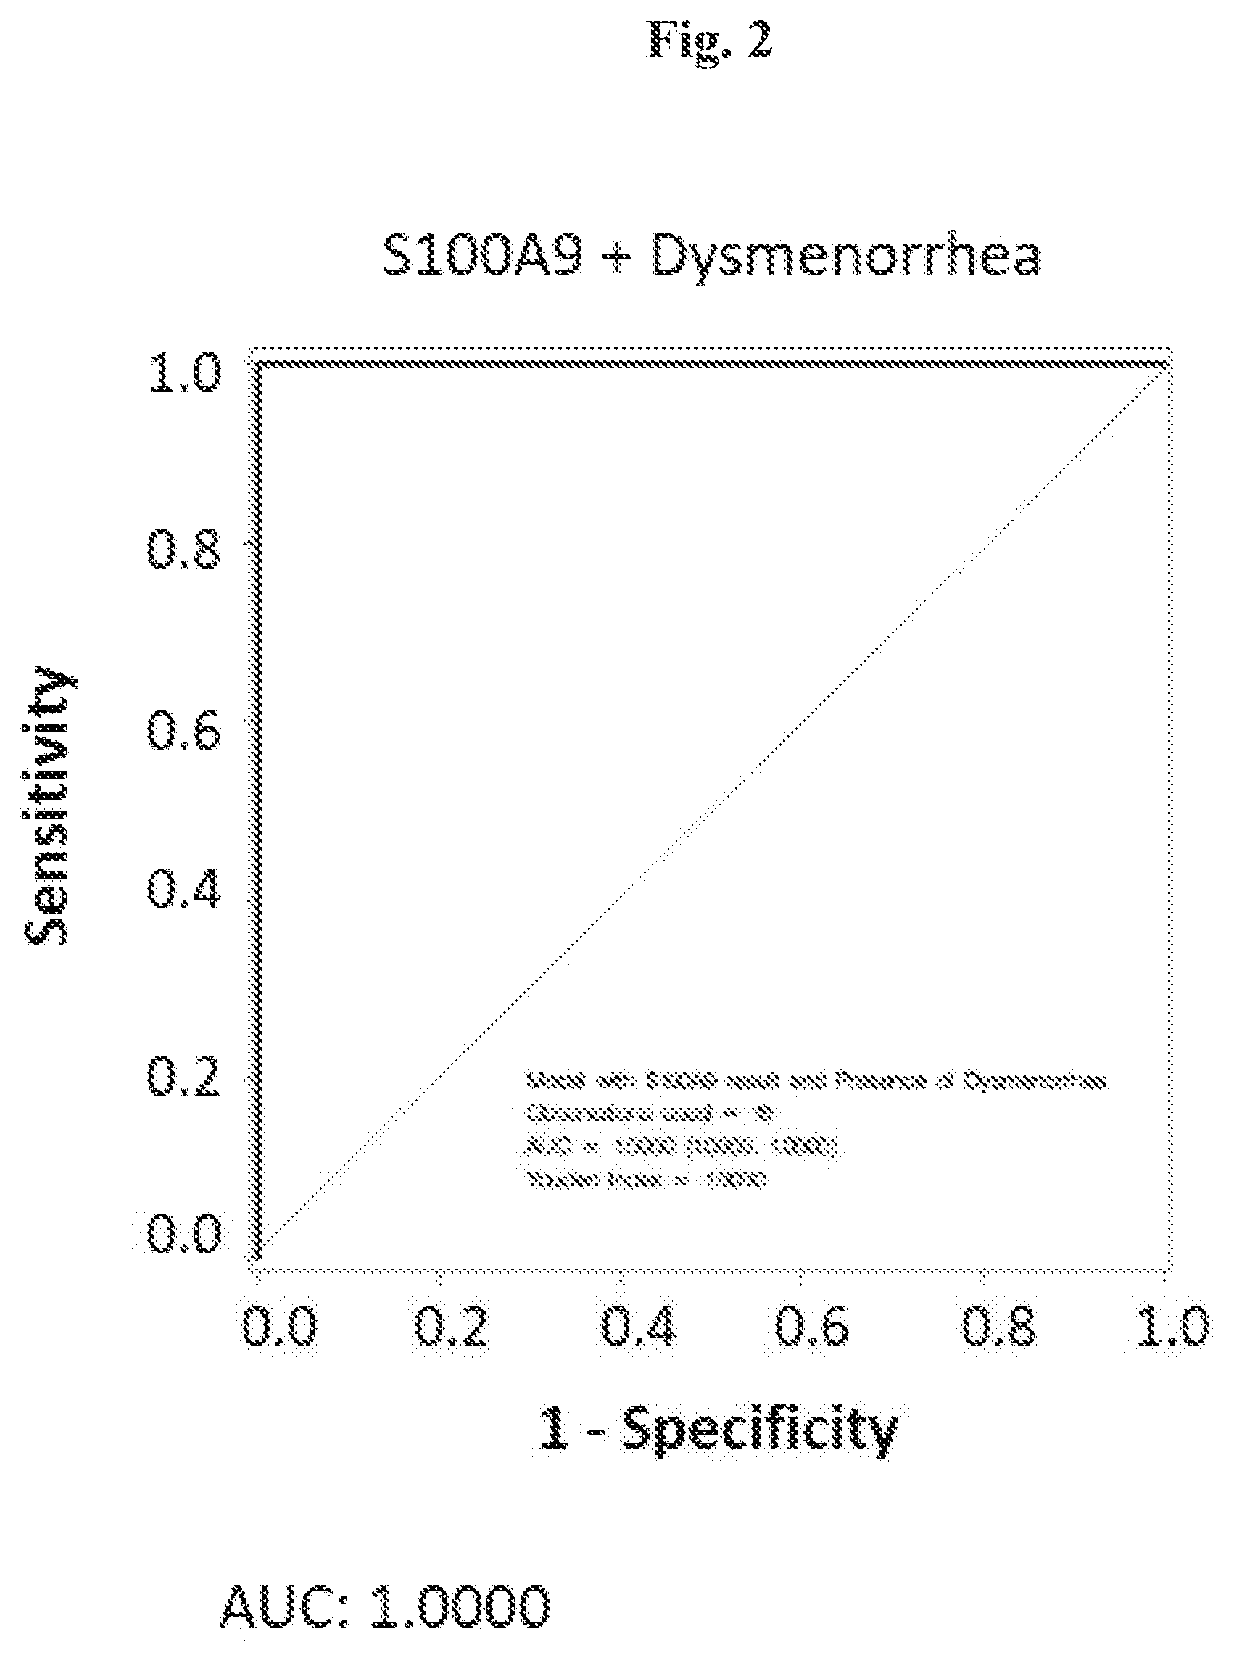 S100a9 as blood biomarker for the non-invasive diagnosis of endometriosis